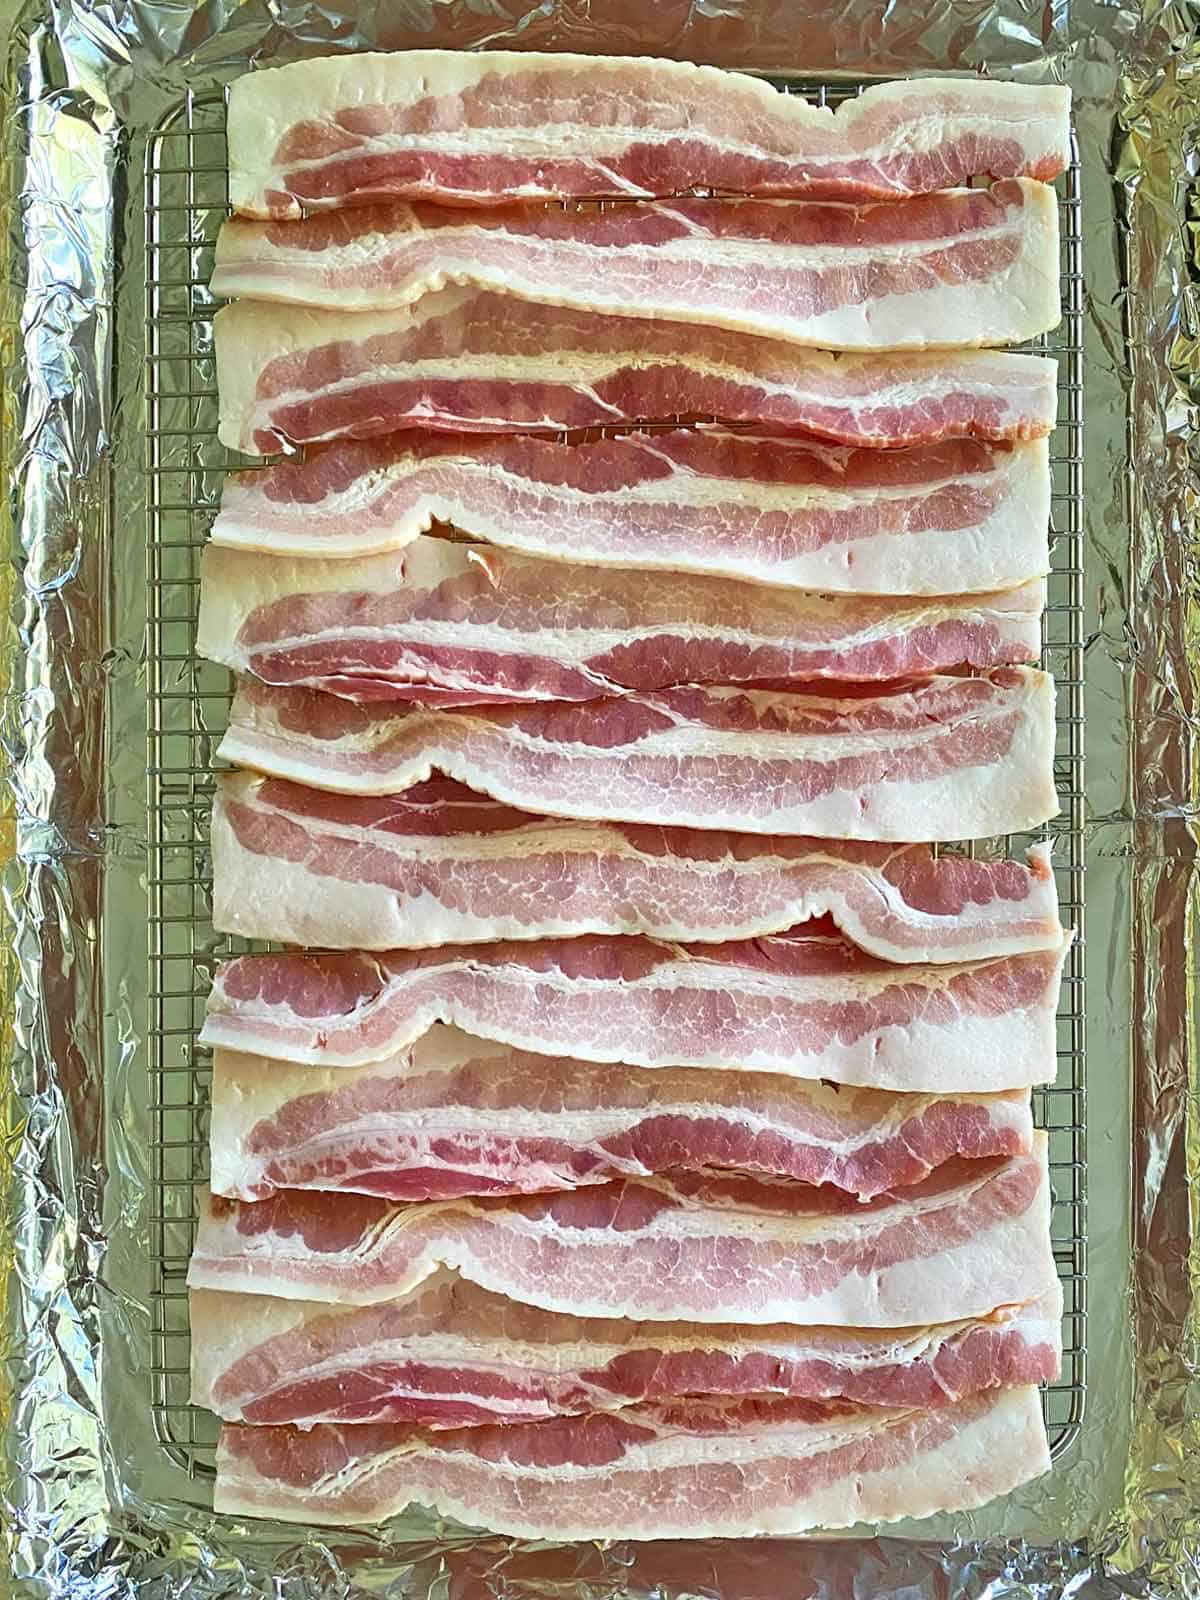 12 strips of bacon on an oven cooking rack.